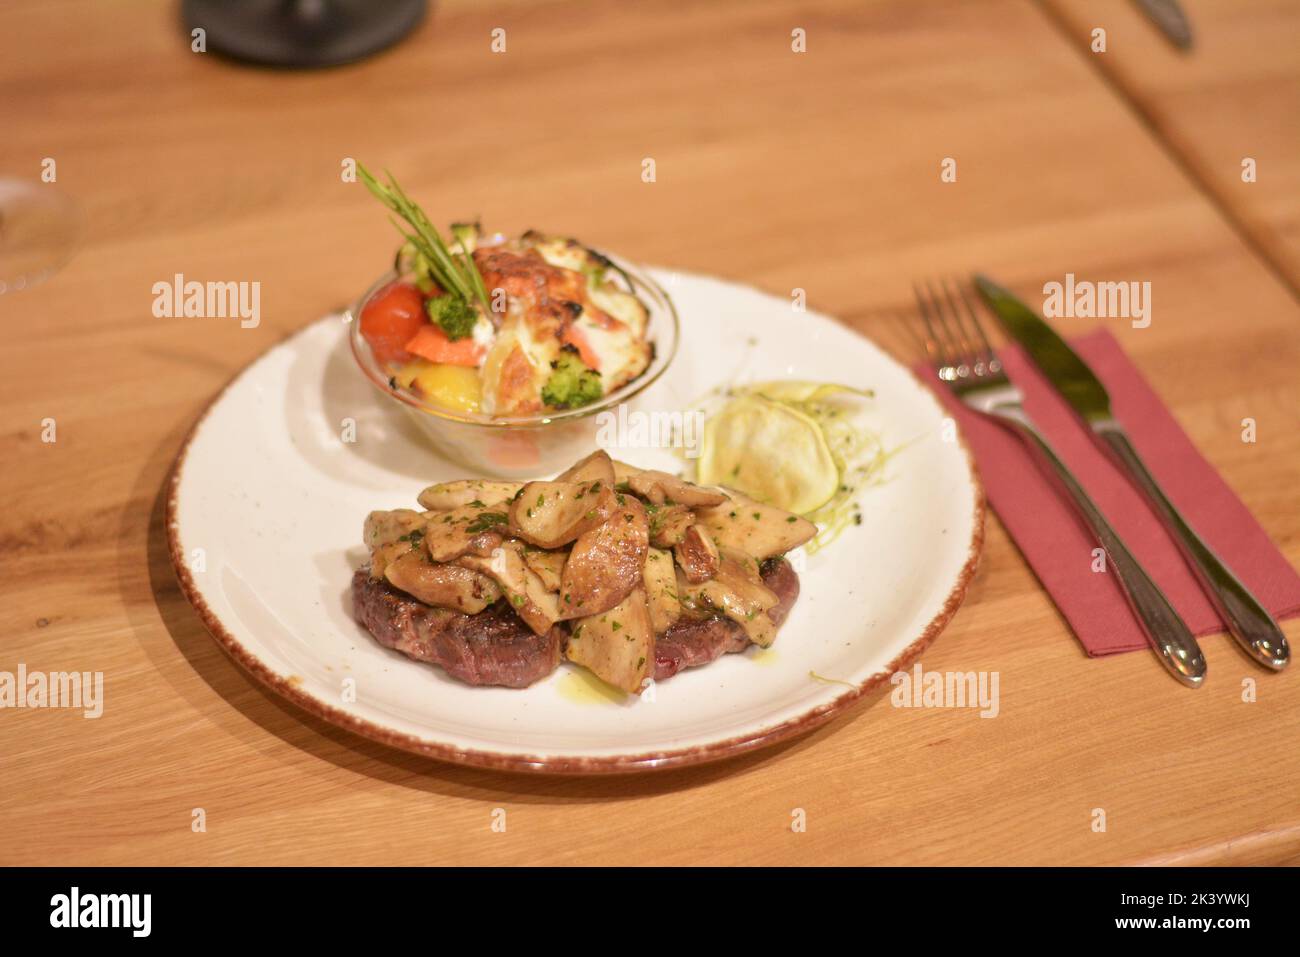 Pork neck covered with sauteed mushrooms, wedges potato with rosemary and wheat germ as decoration. Stock Photo